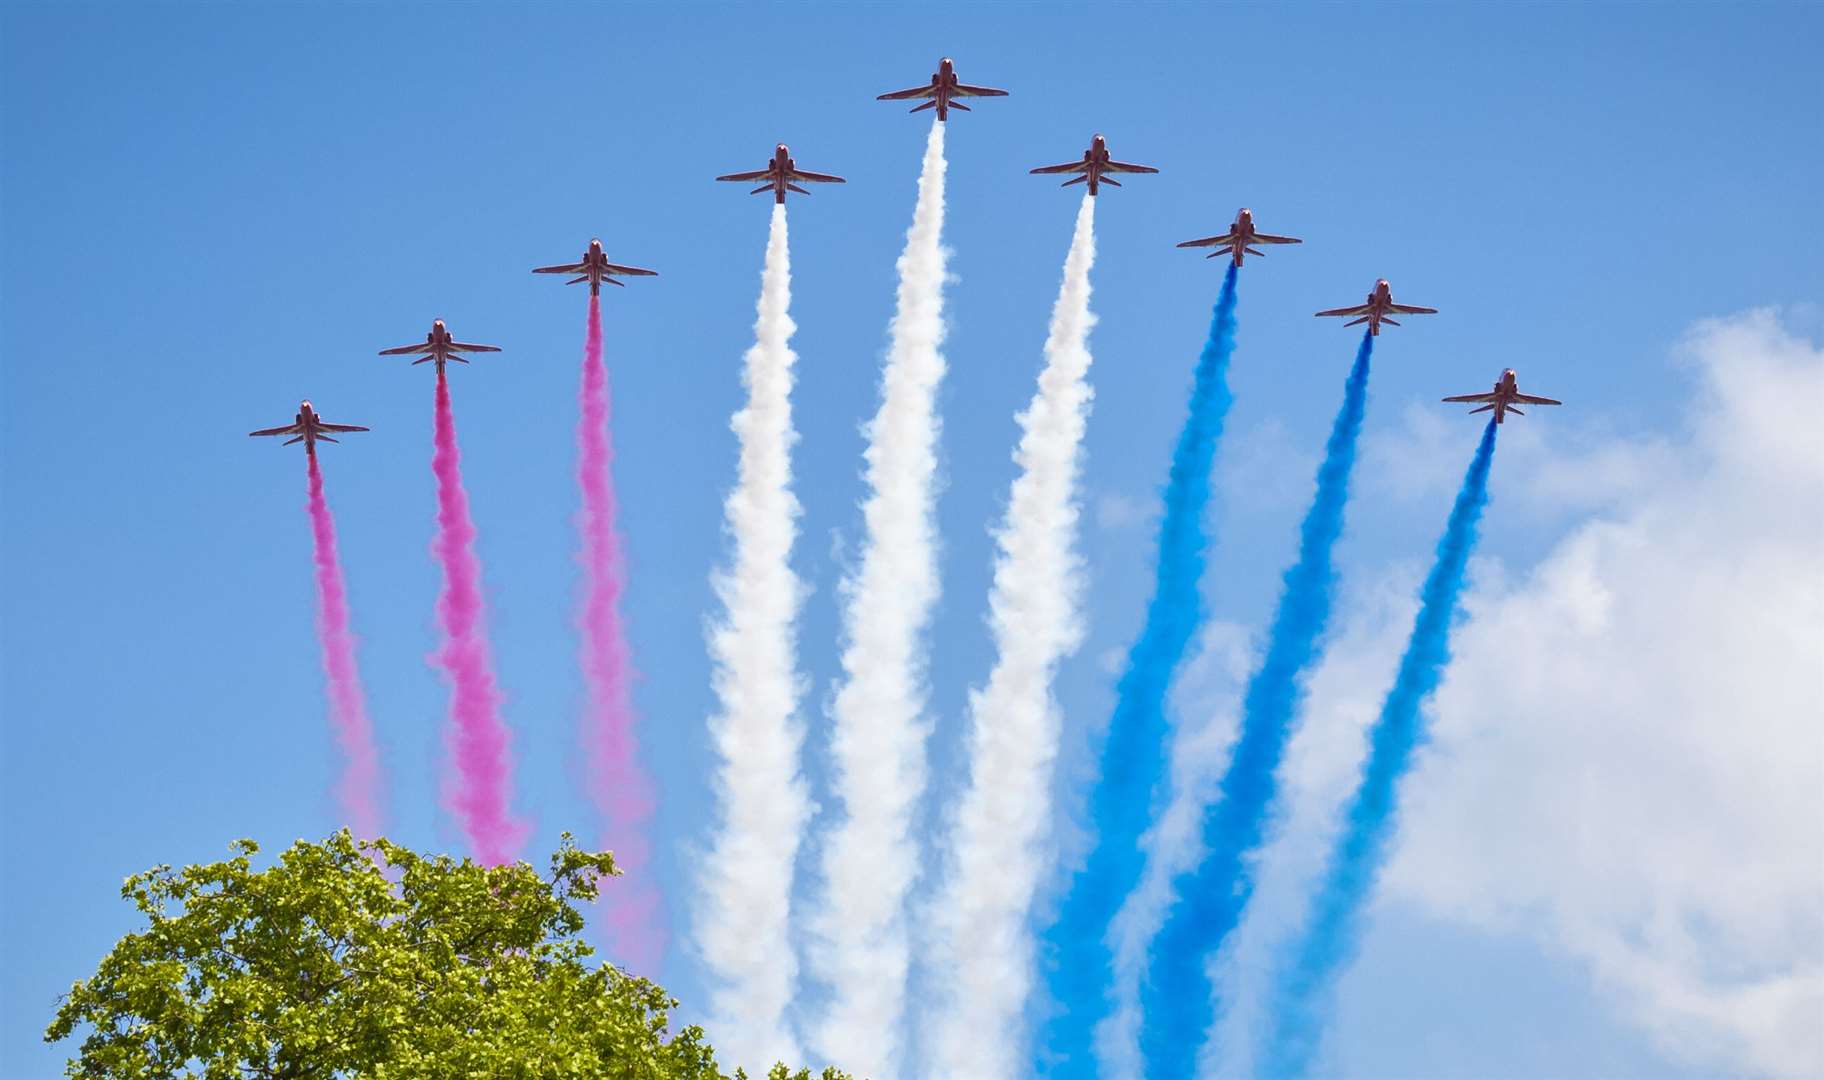 The Red Arrows this week will be at Headcorn